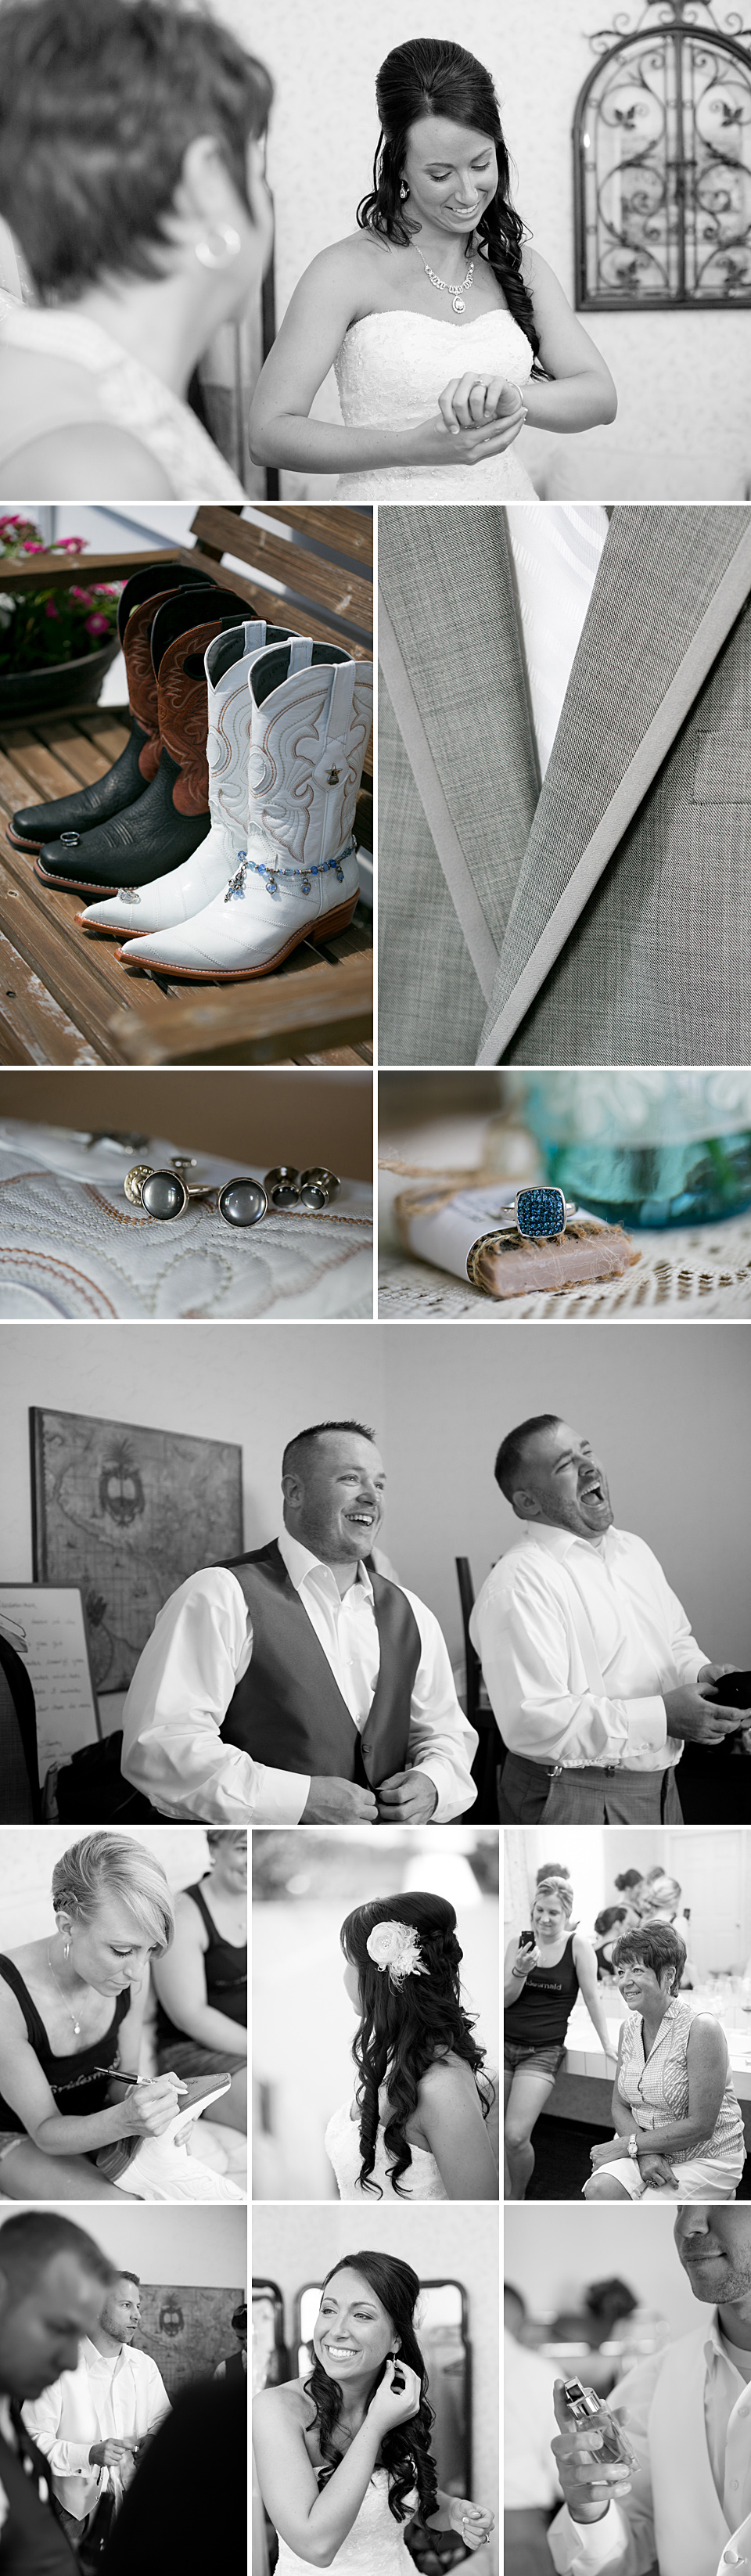 Cuff links, custom soap party favors, Country weddings, cowboy boots, Jana Marie Photography